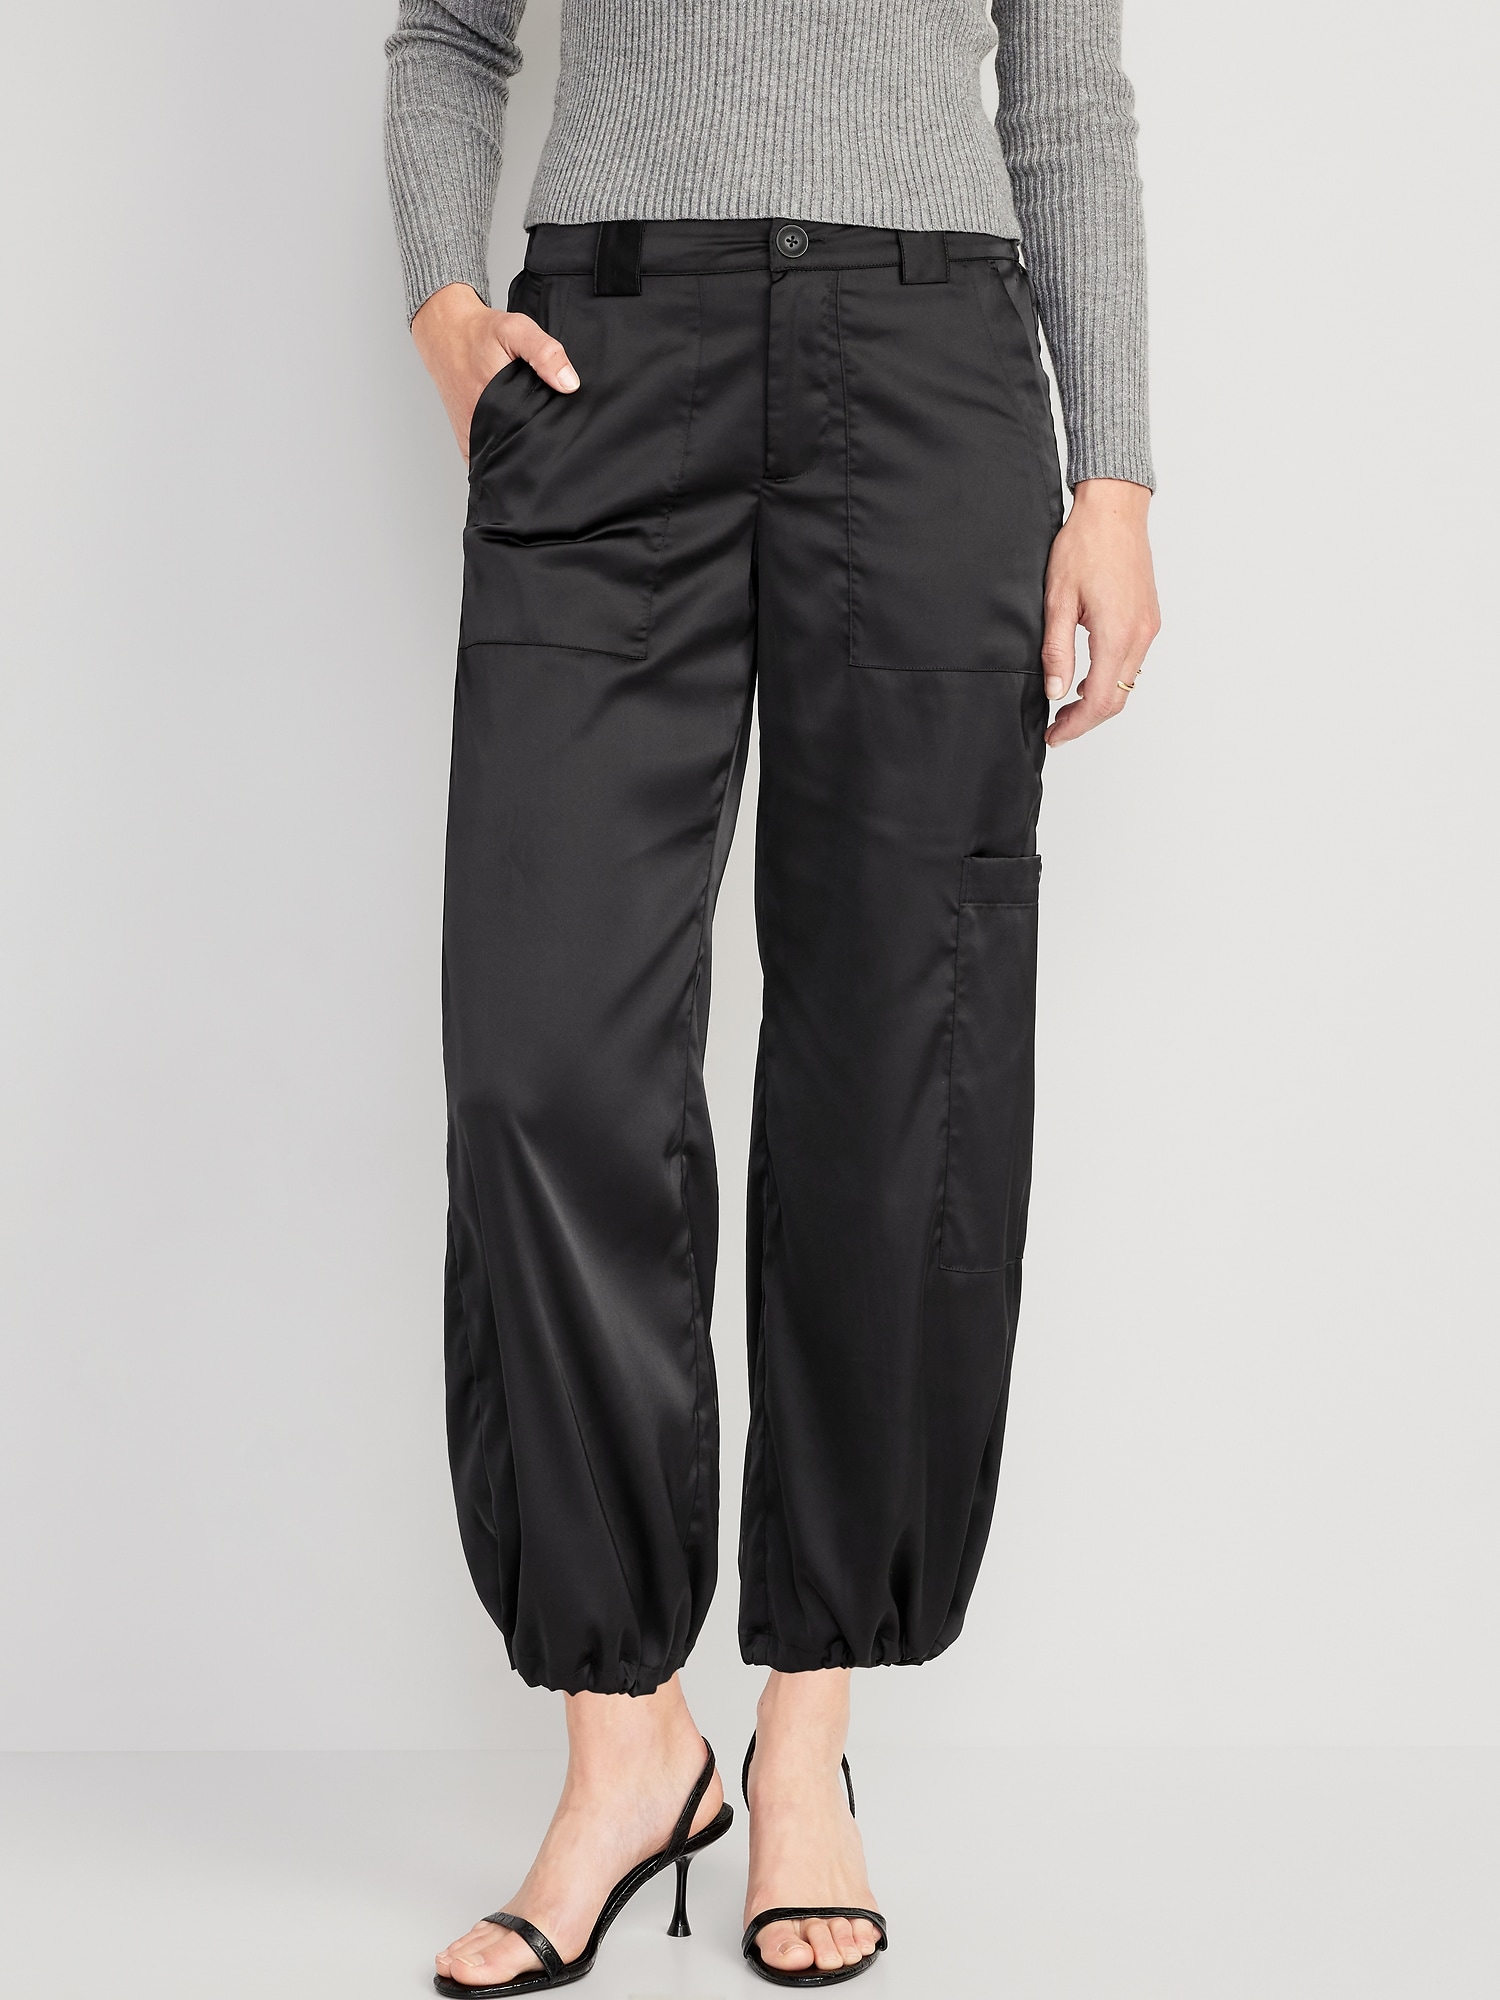 Olive Cargo Pants For Women